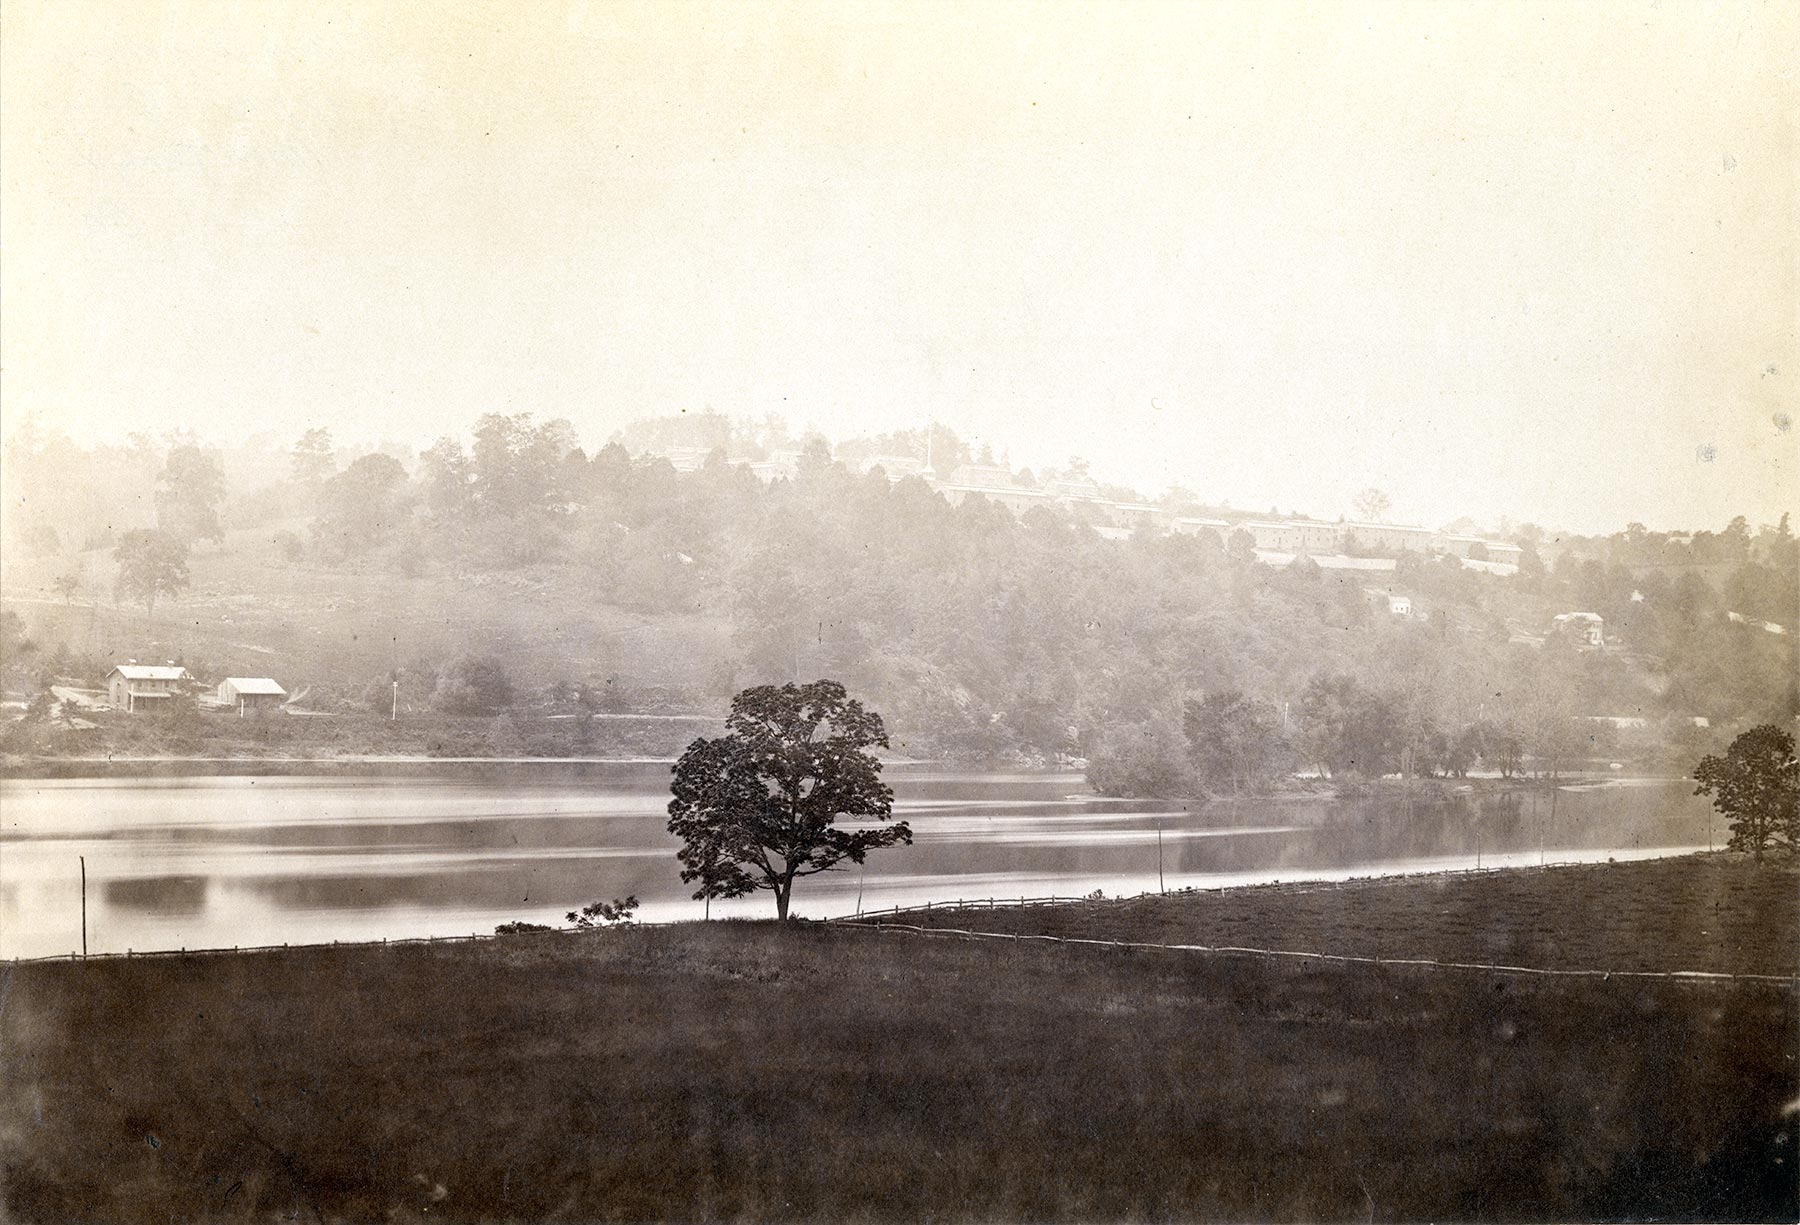 misty rural countryside looking across river to a wooded hill with buildings at crest